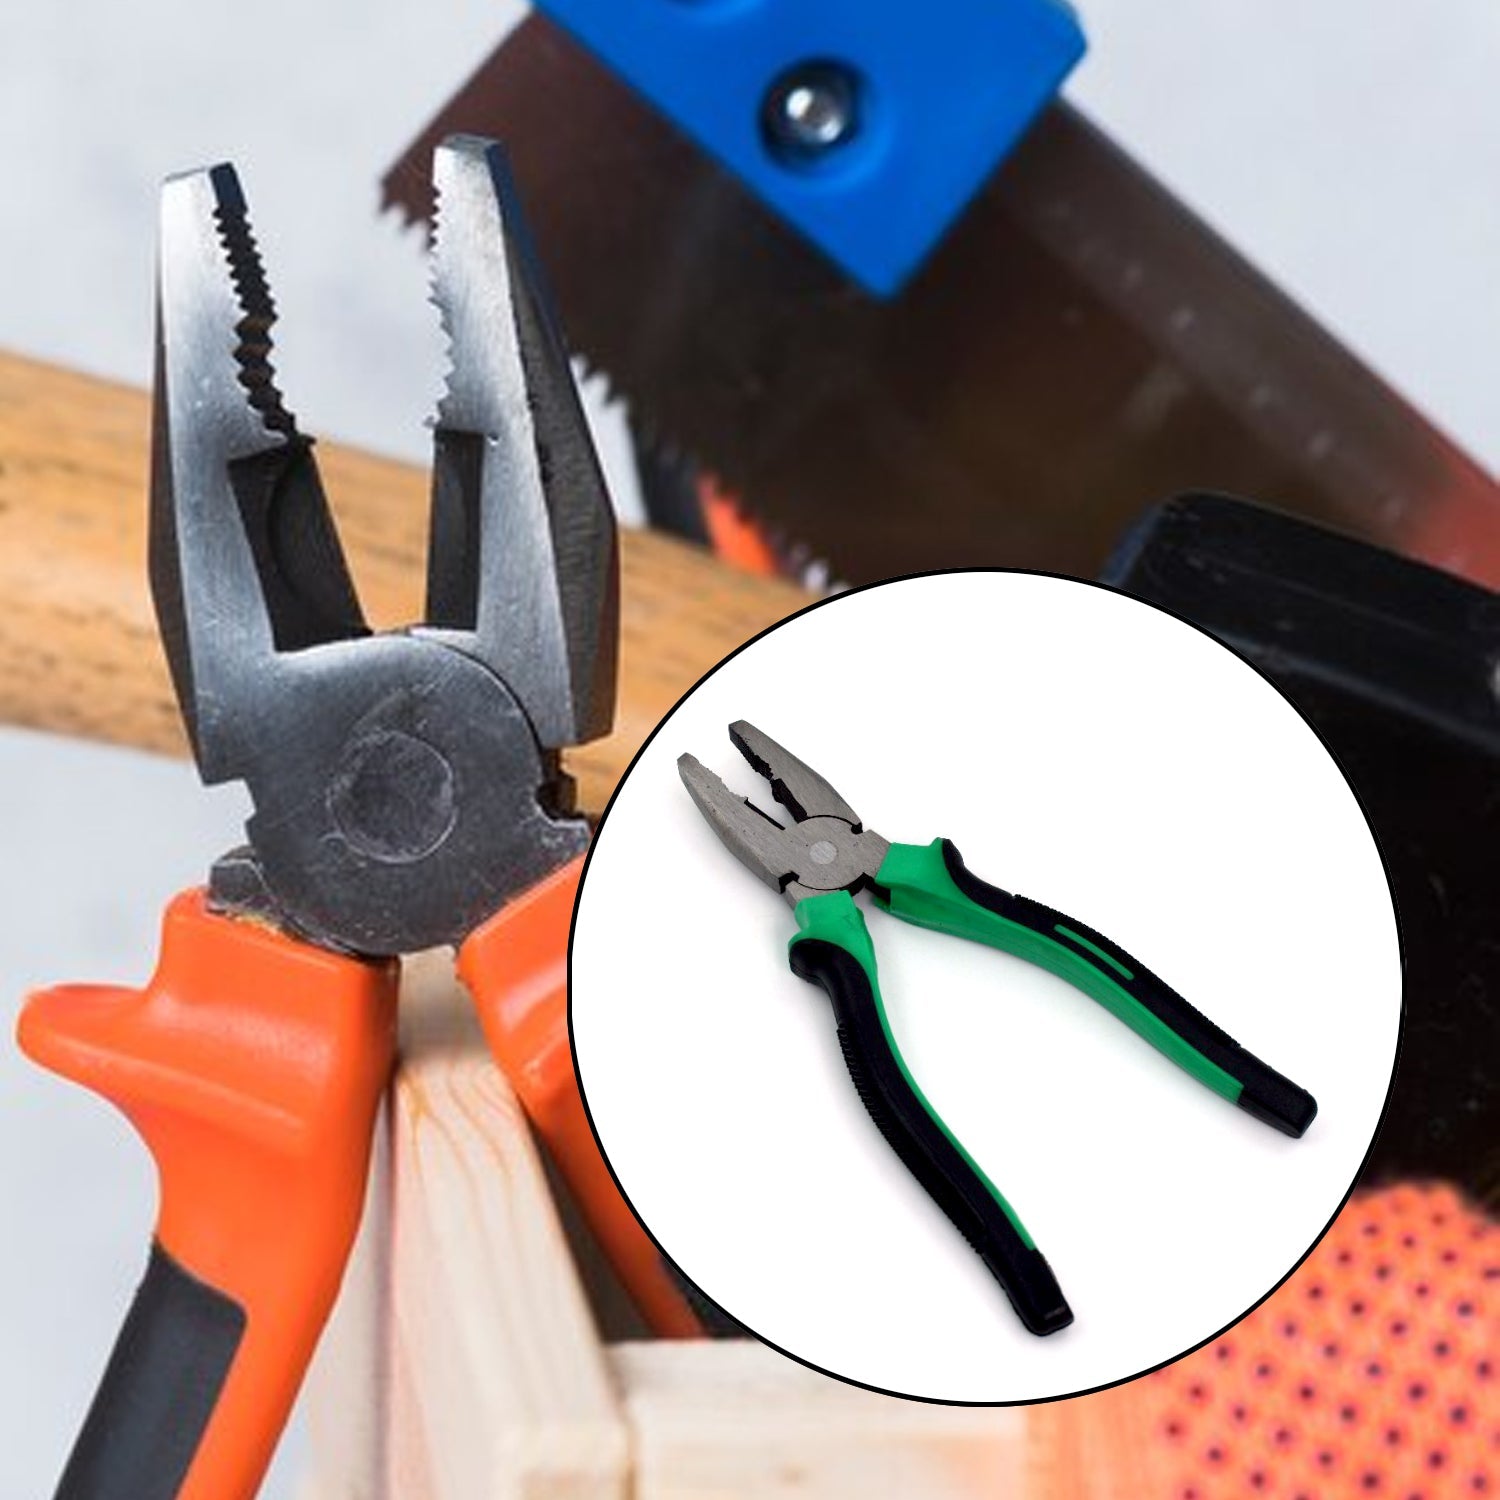 9184 14-Pieces Screwdriver Kit/Screwdriver combo Set Combination Plier For Home Use/For Multipurpose Application DeoDap